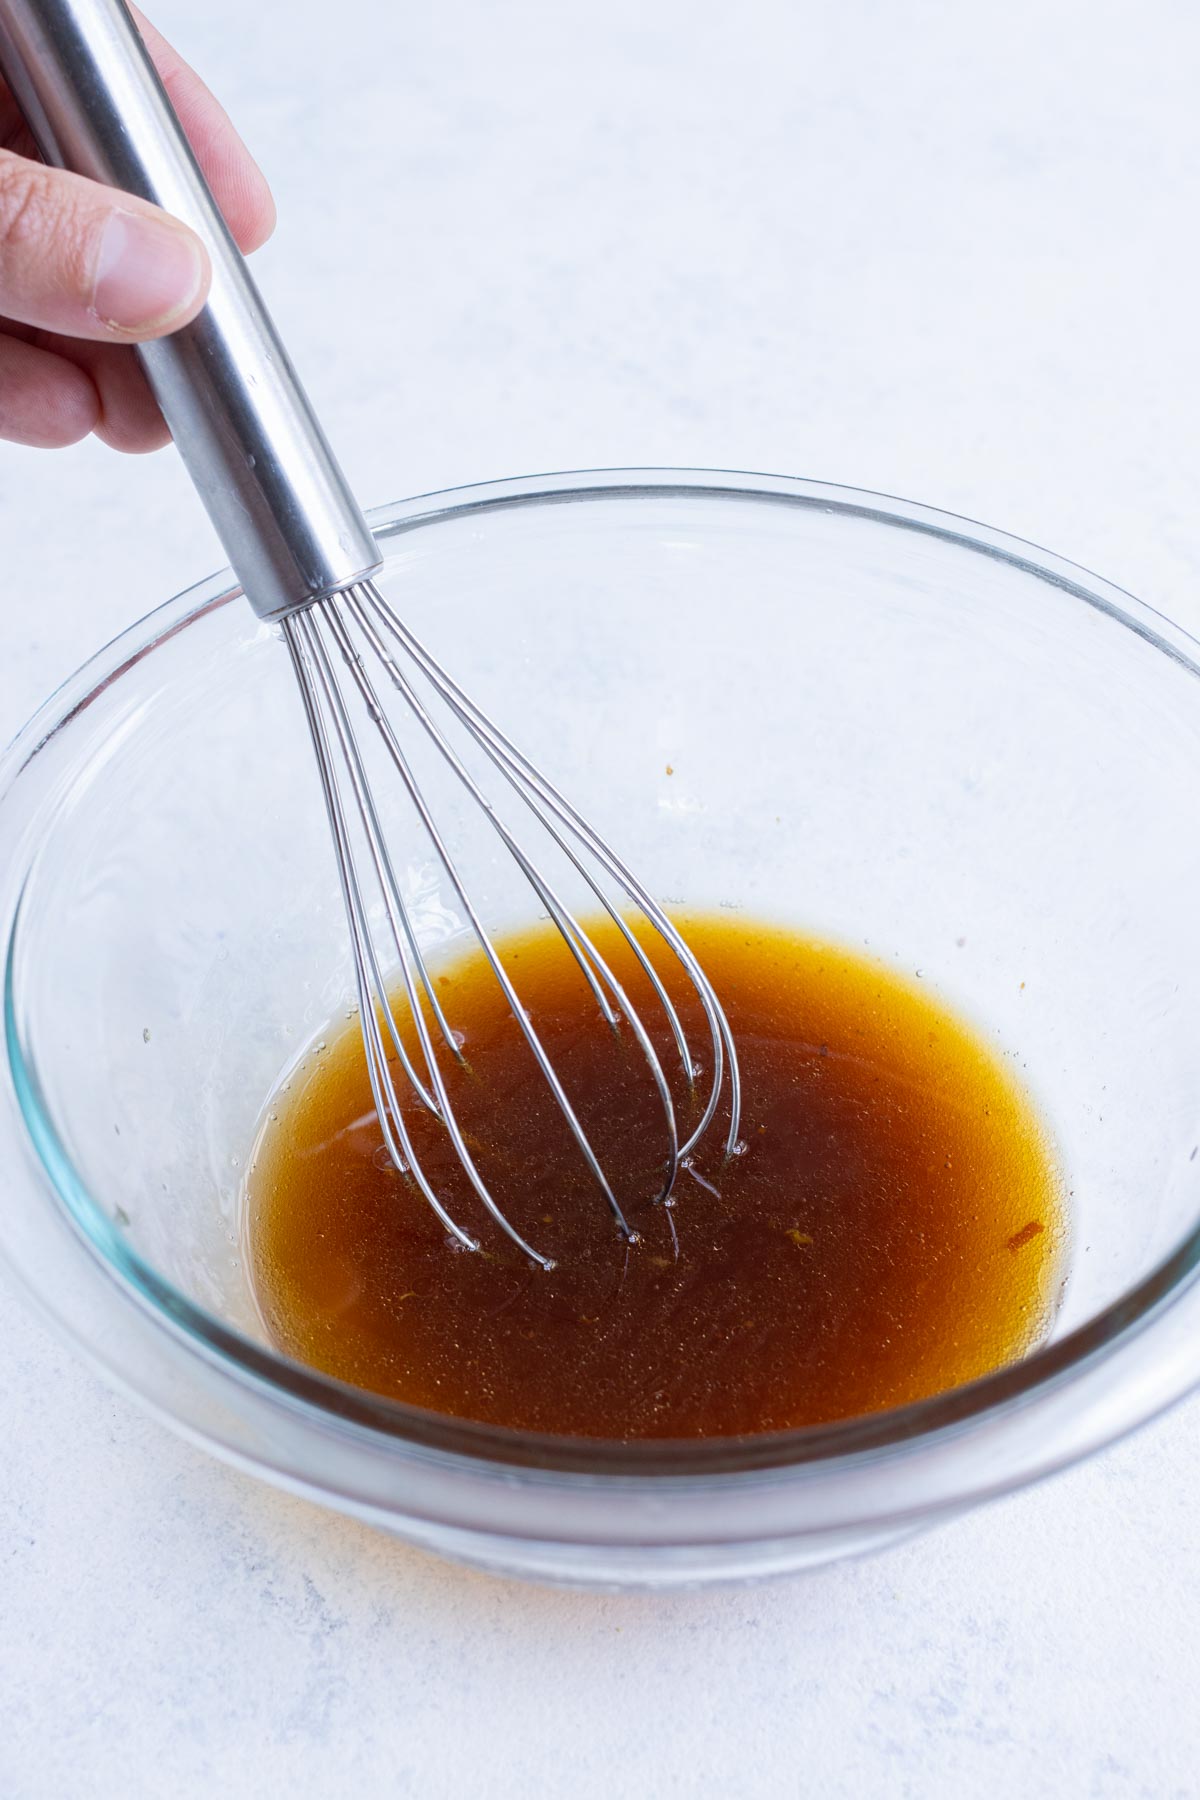 A whisk is used to stir dressing ingredients in a glass bowl.